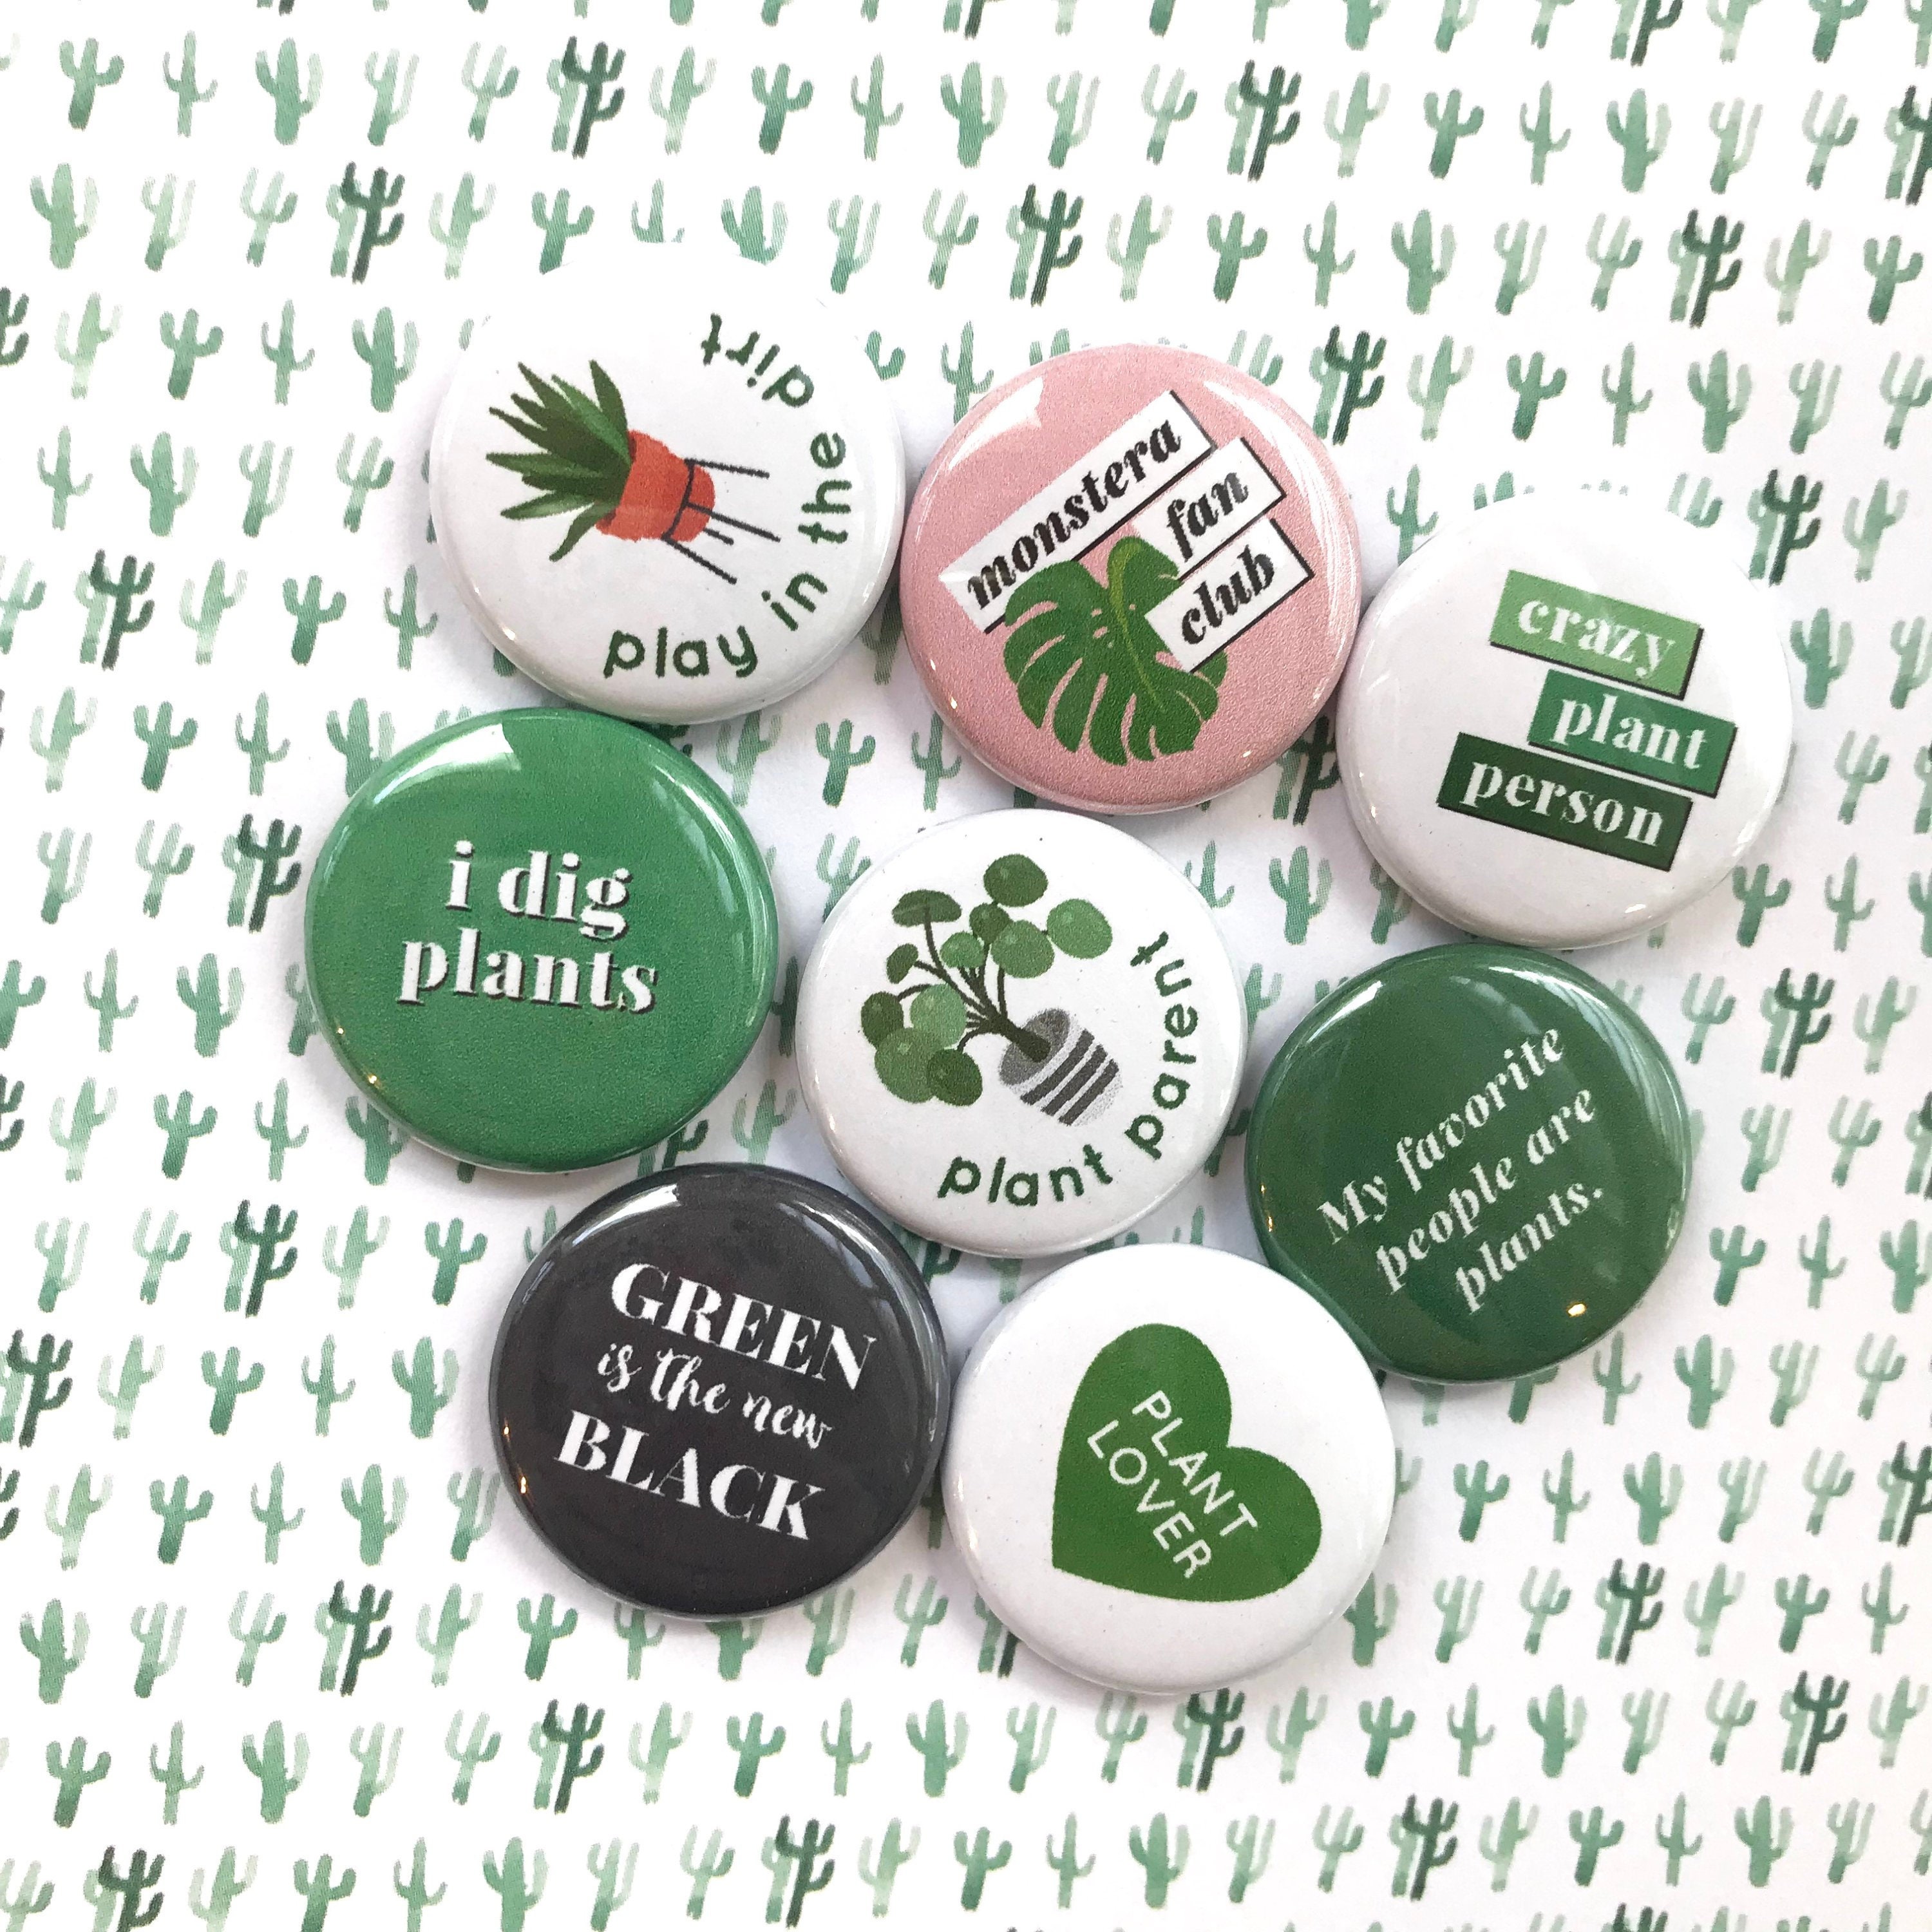 Plant Pins by Plant Circle, show them you're a real plant lover!